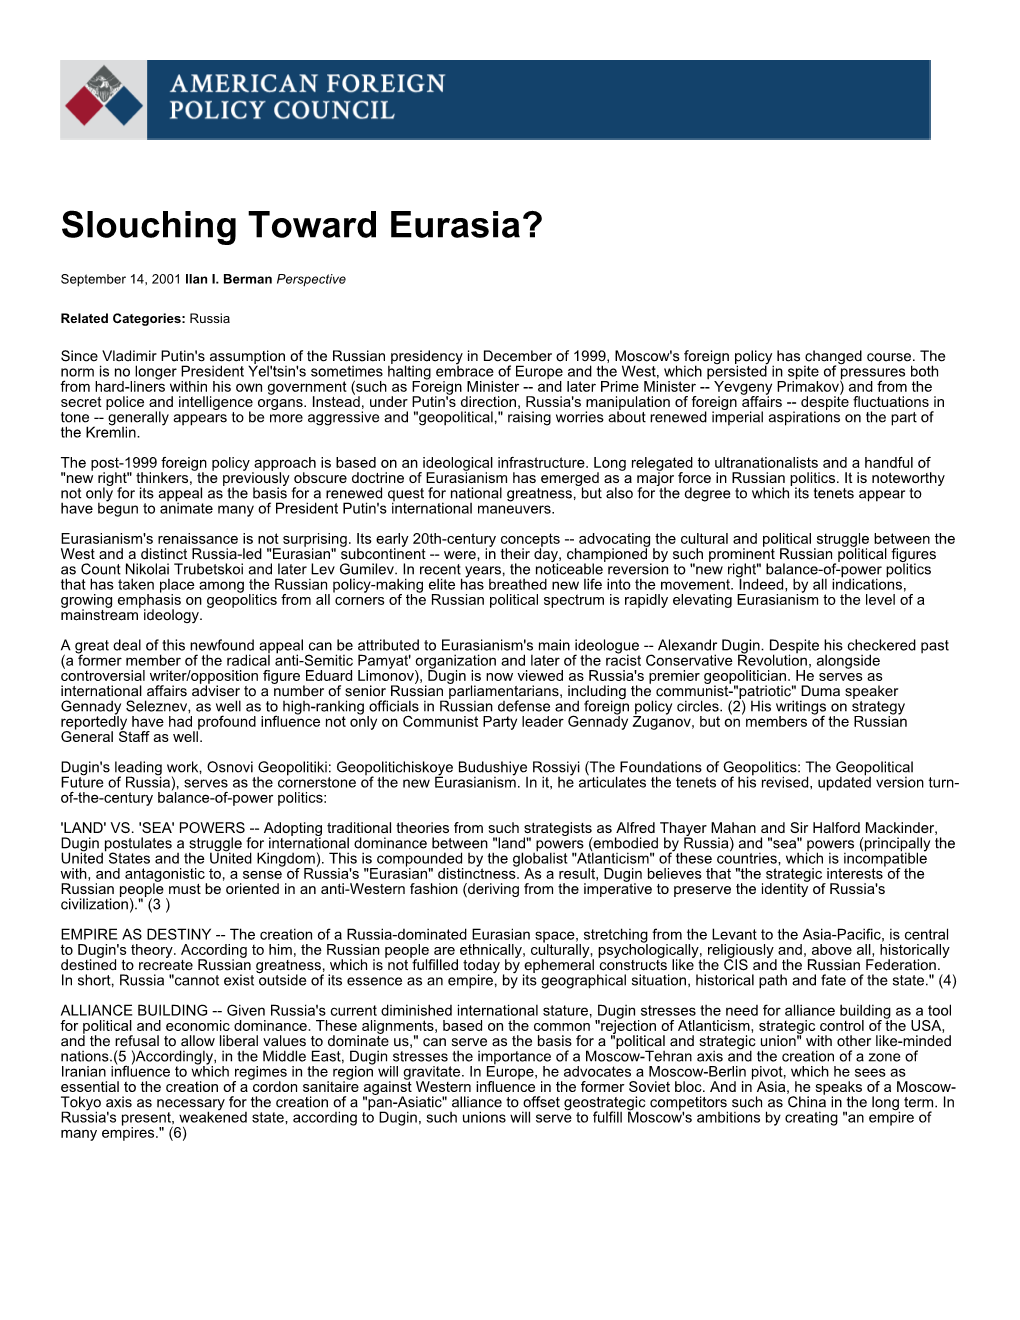 Slouching Toward Eurasia? | American Foreign Policy Council